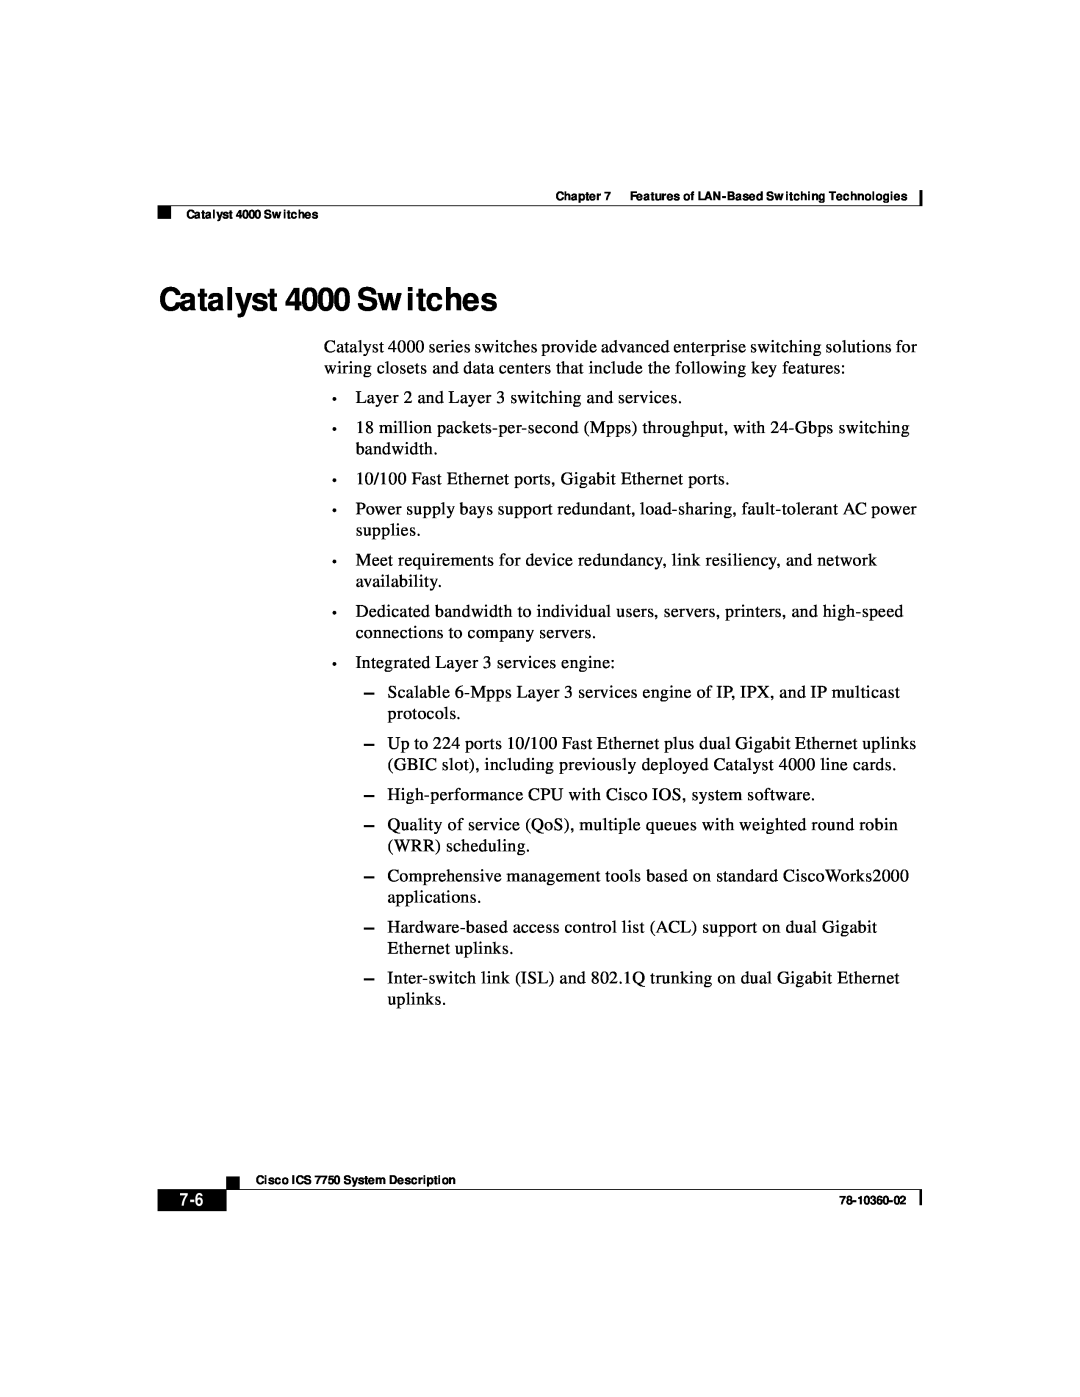 Cisco Systems ICS-7750 manual Catalyst 4000 Switches 